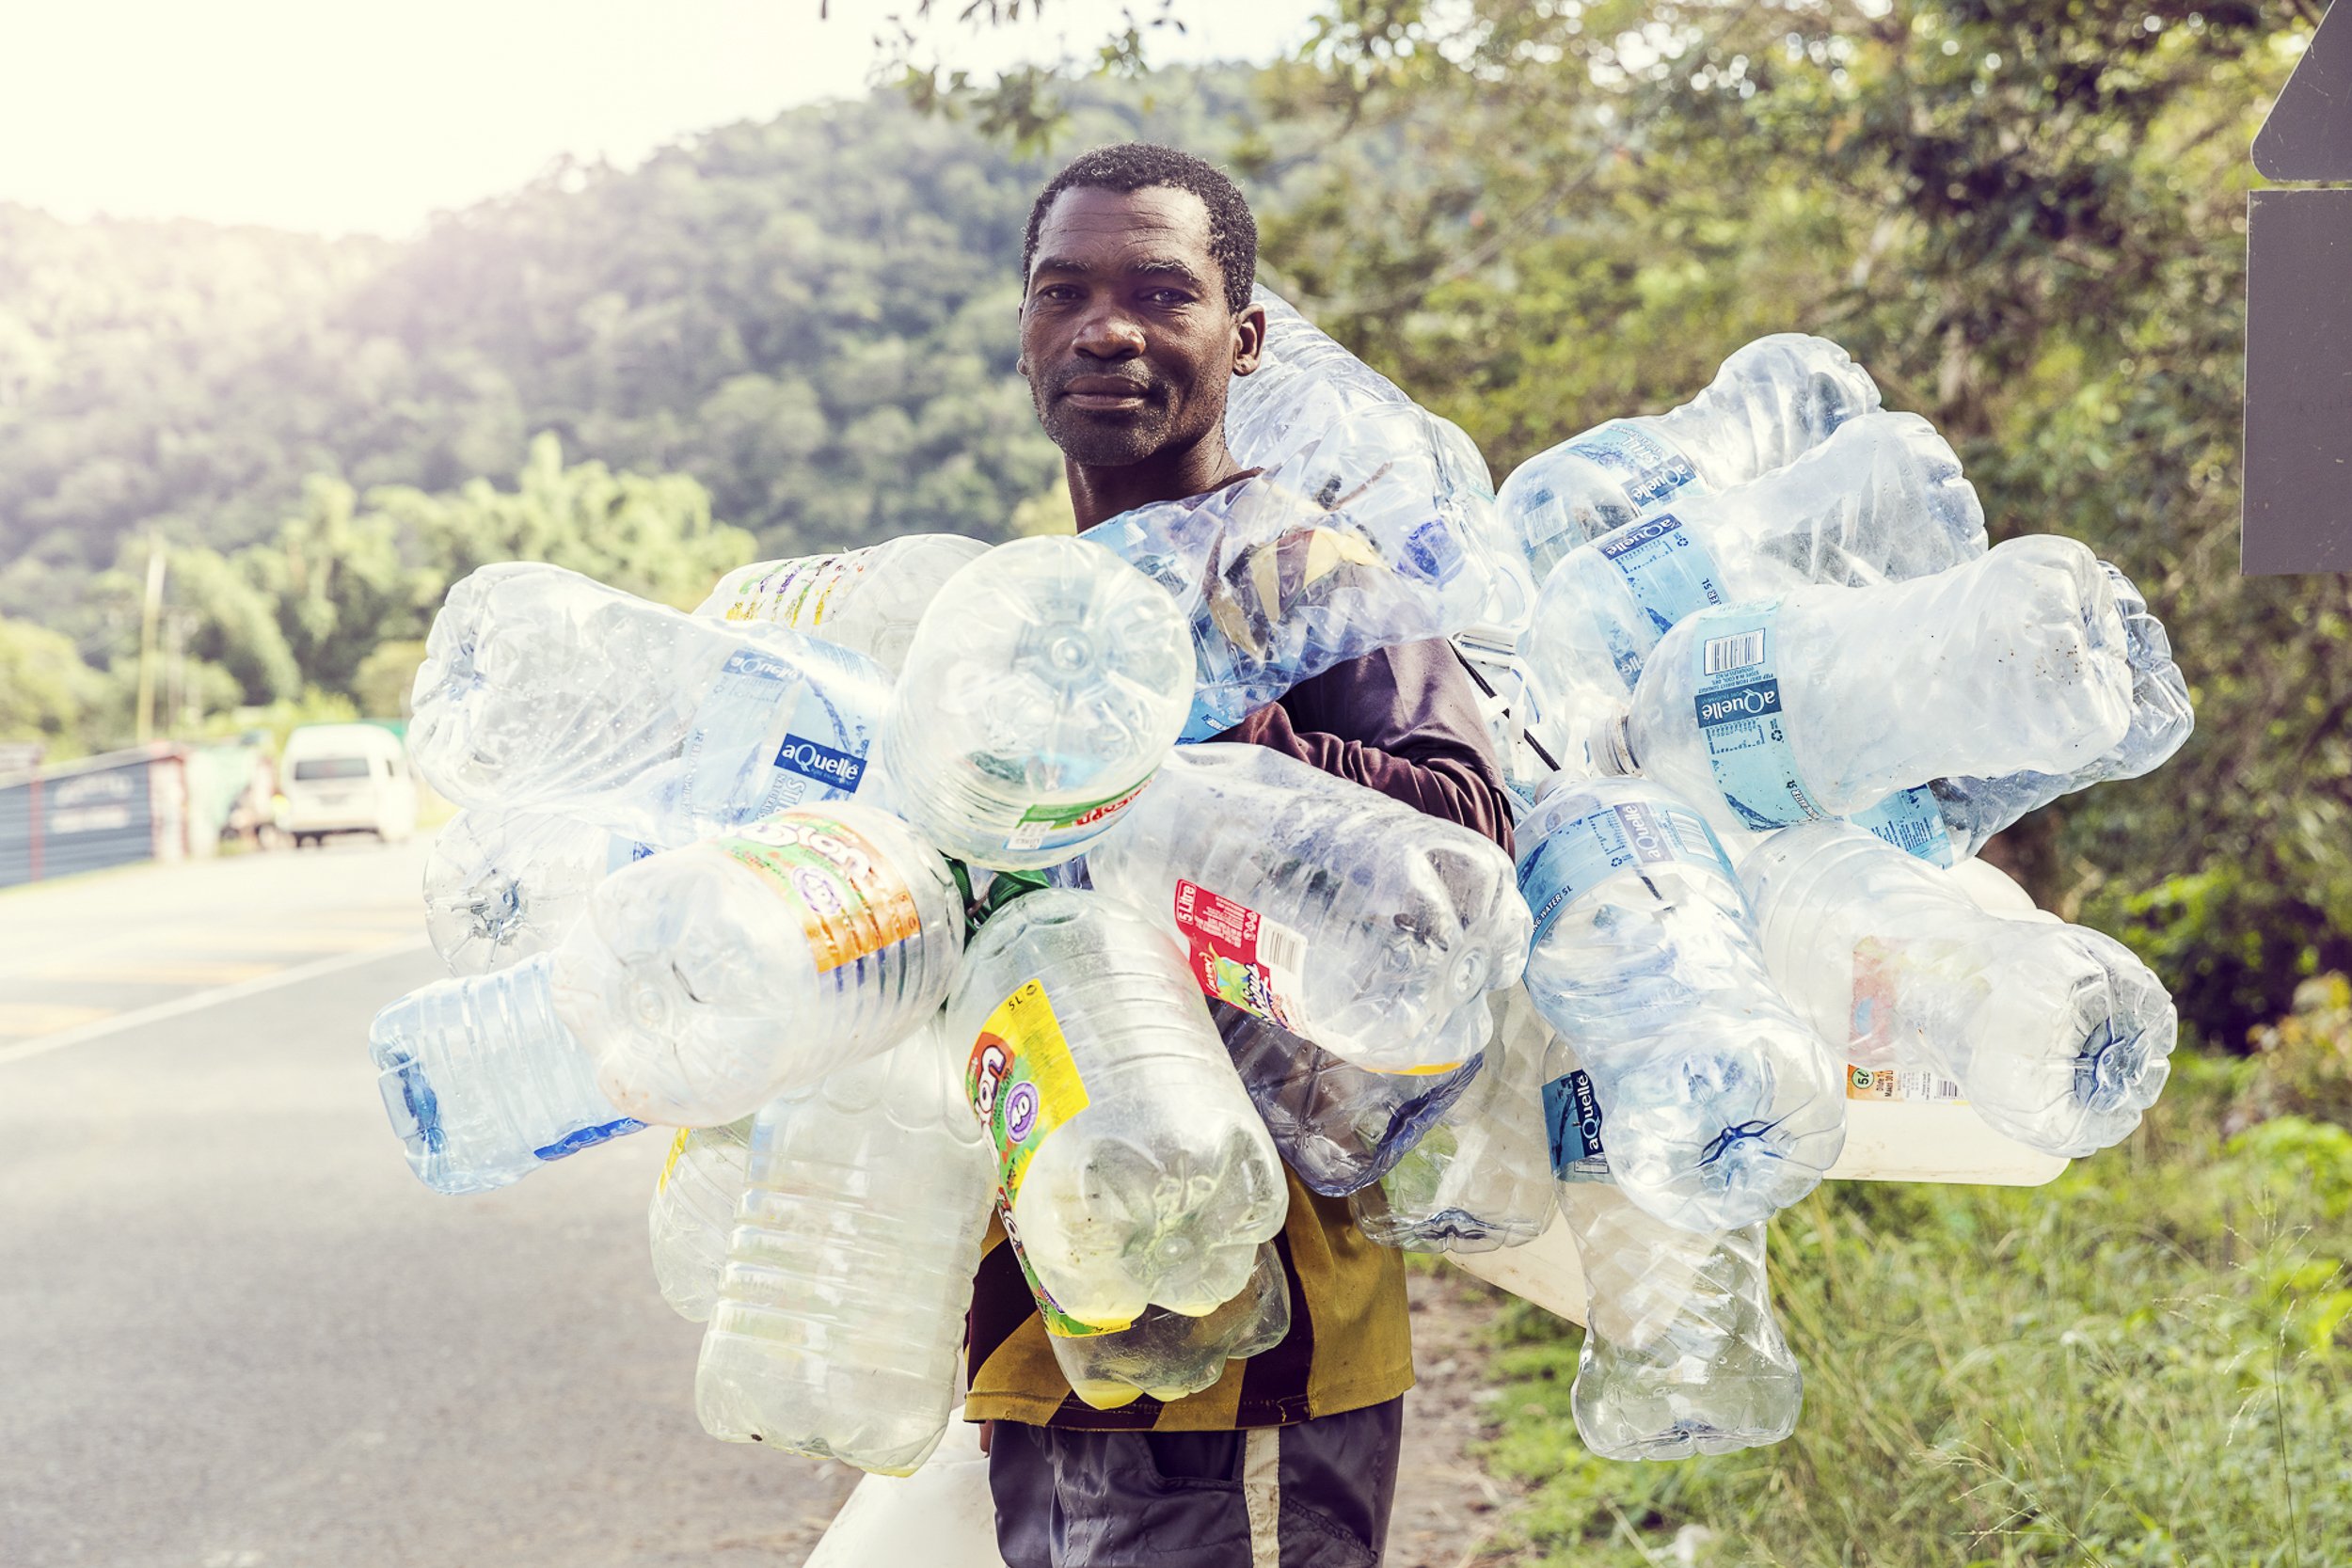 Reportage of man with many plastic bottles